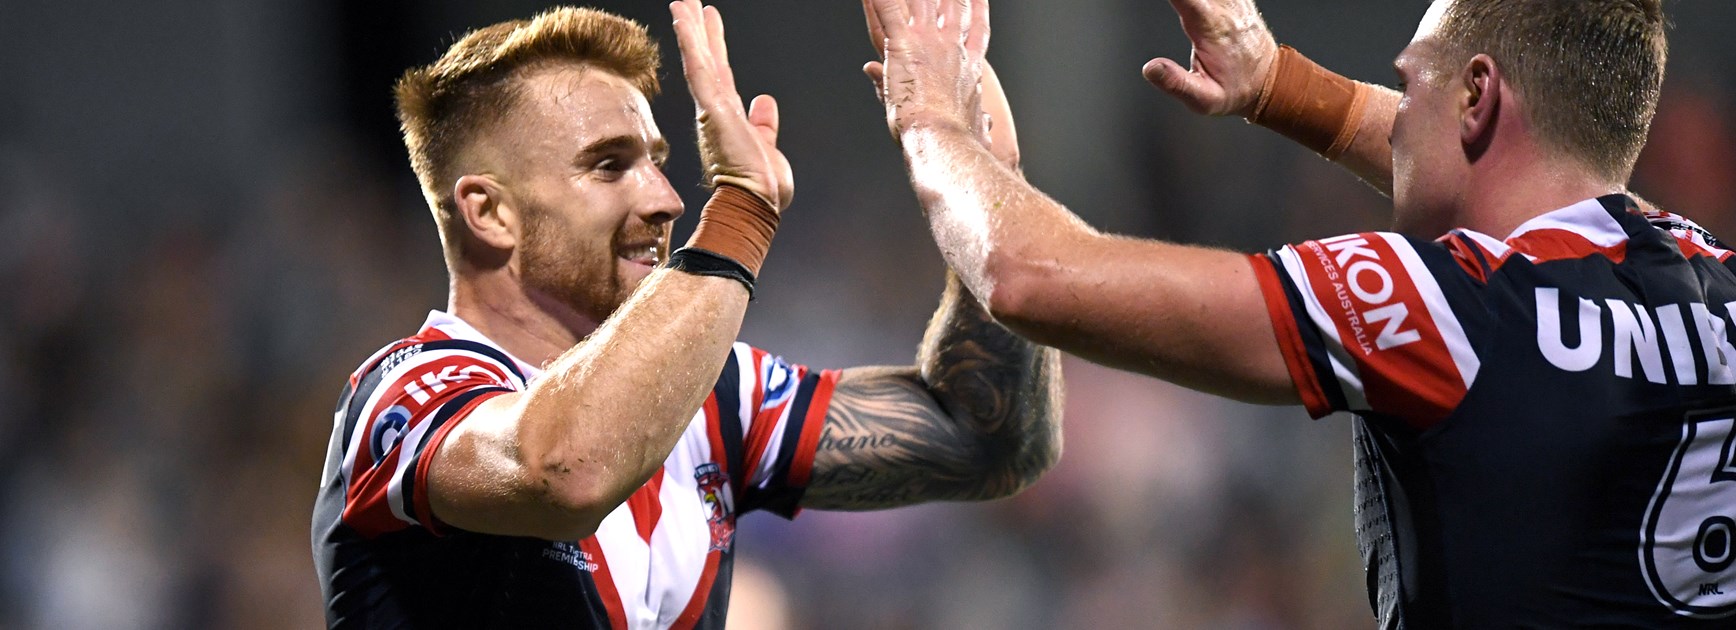 Golden Boots Dominate as Roosters Kick-On to Finals